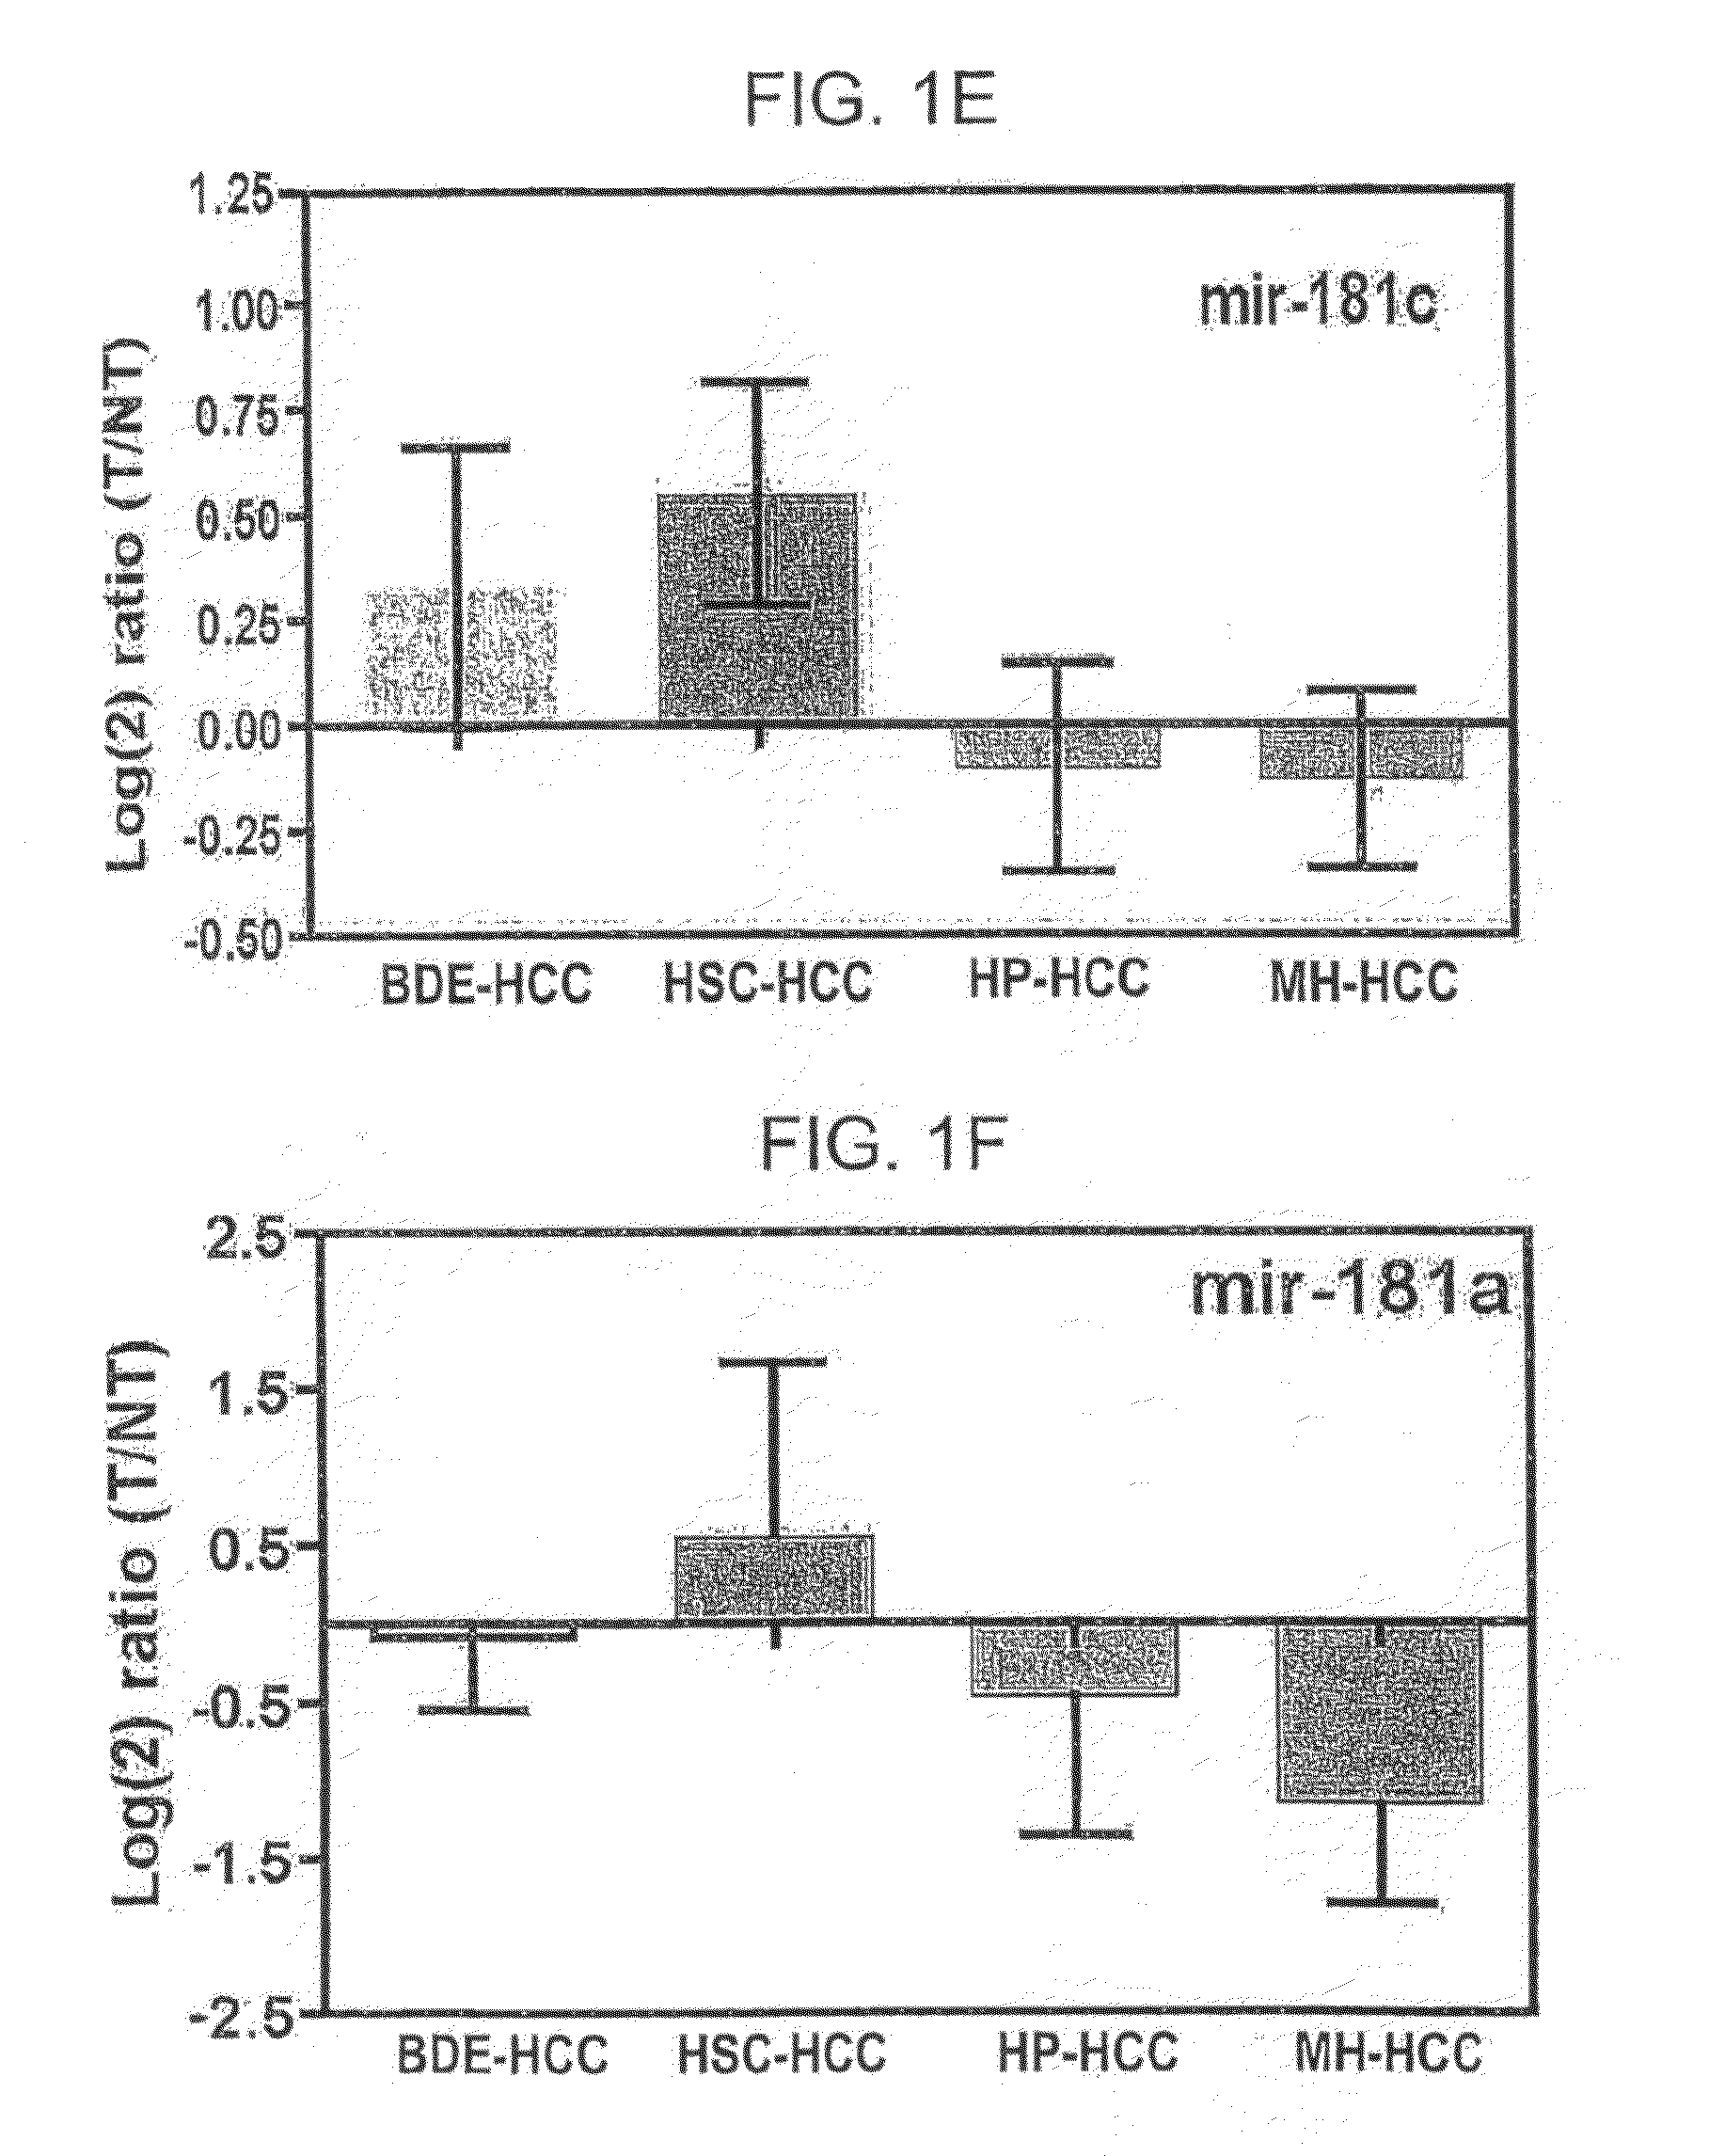 Methods for Determining Heptocellular Carcinoma Subtype and Detecting Hepatic Cancer Stem Cells